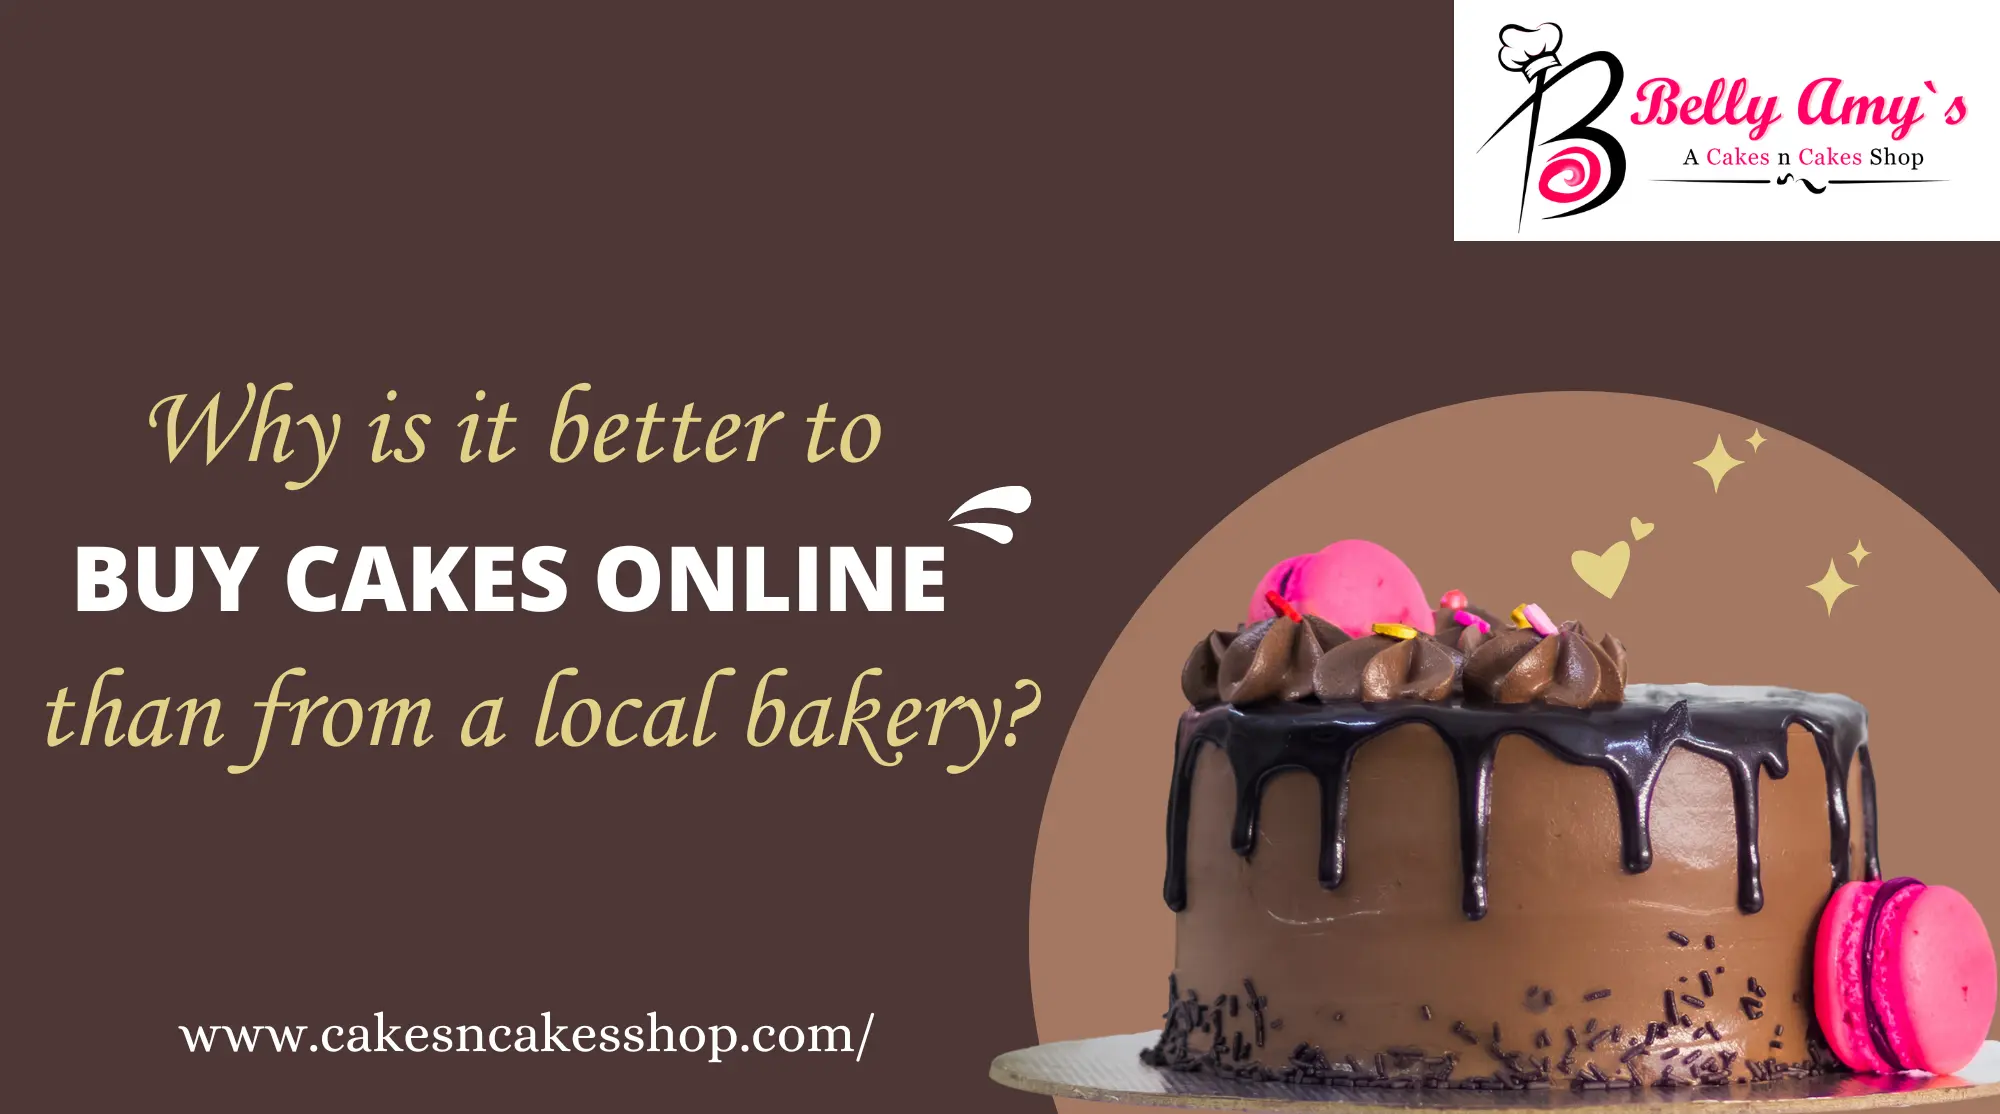 Why is it better to buy cakes online than from a local bakery